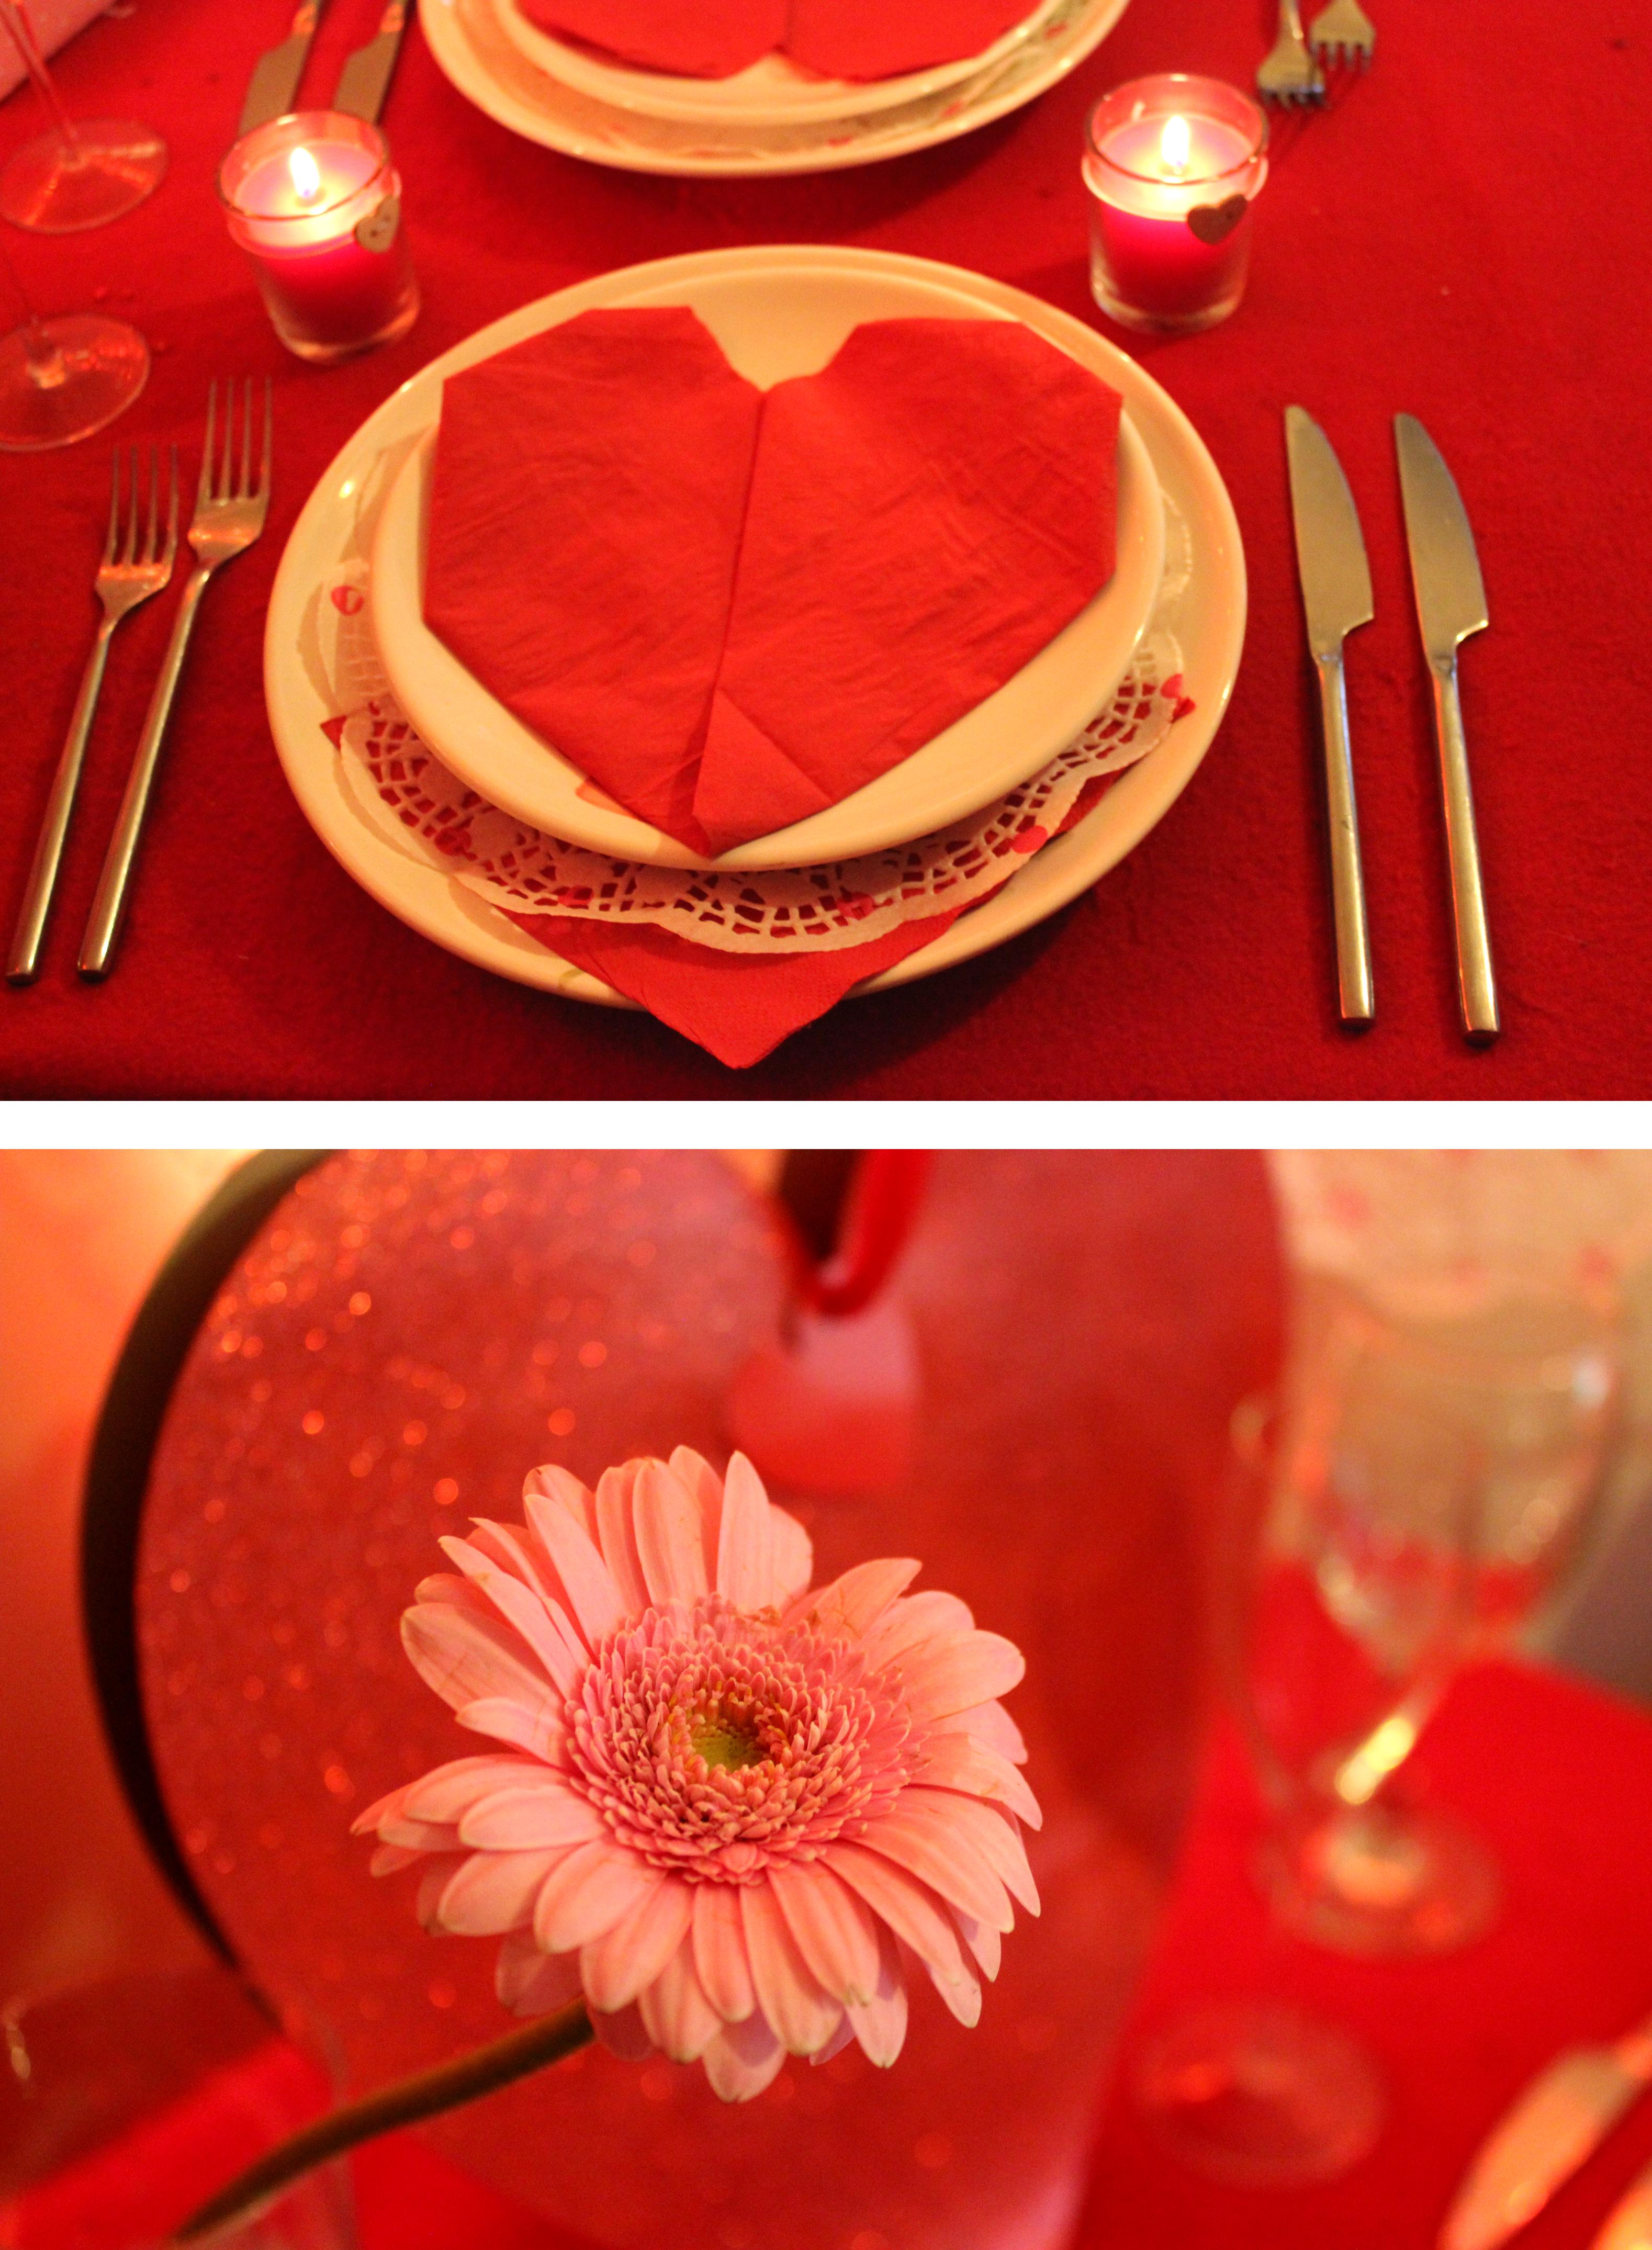 DIY special valentines meal ideas with napkin folding